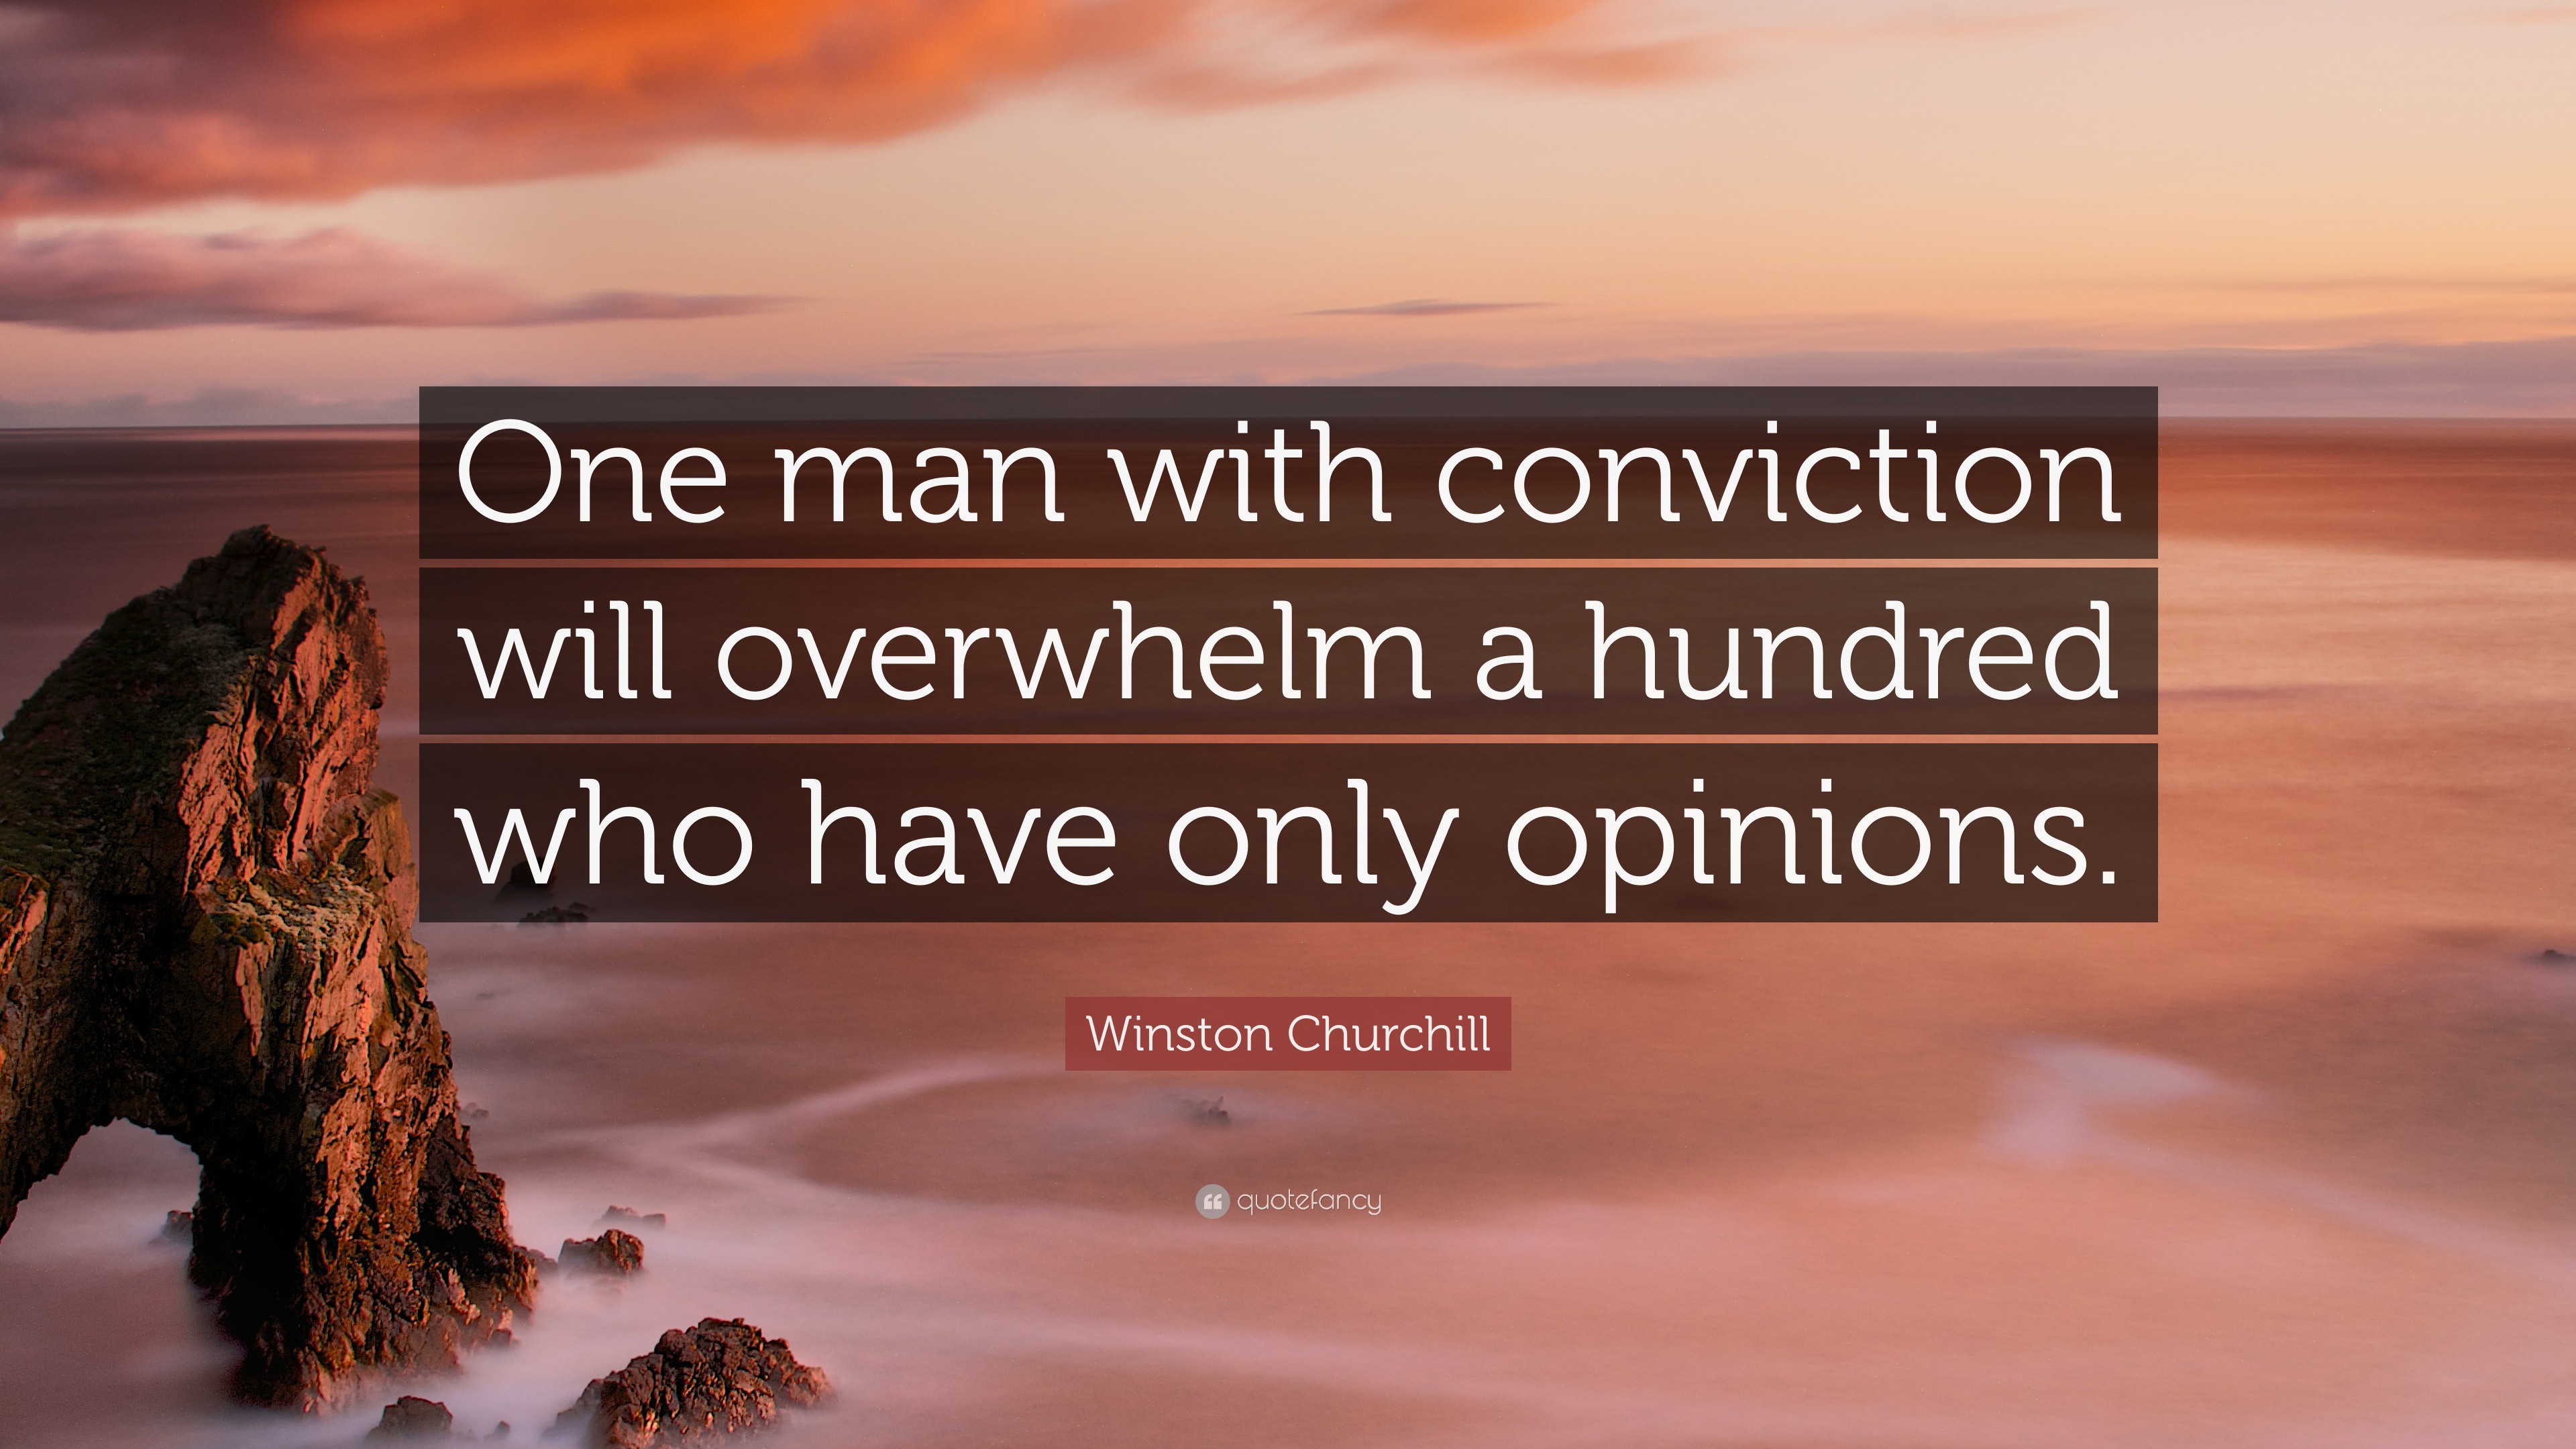 Winston Churchill Quote “one Man With Conviction Will Overwhelm A Hundred Who Have Only Opinions”